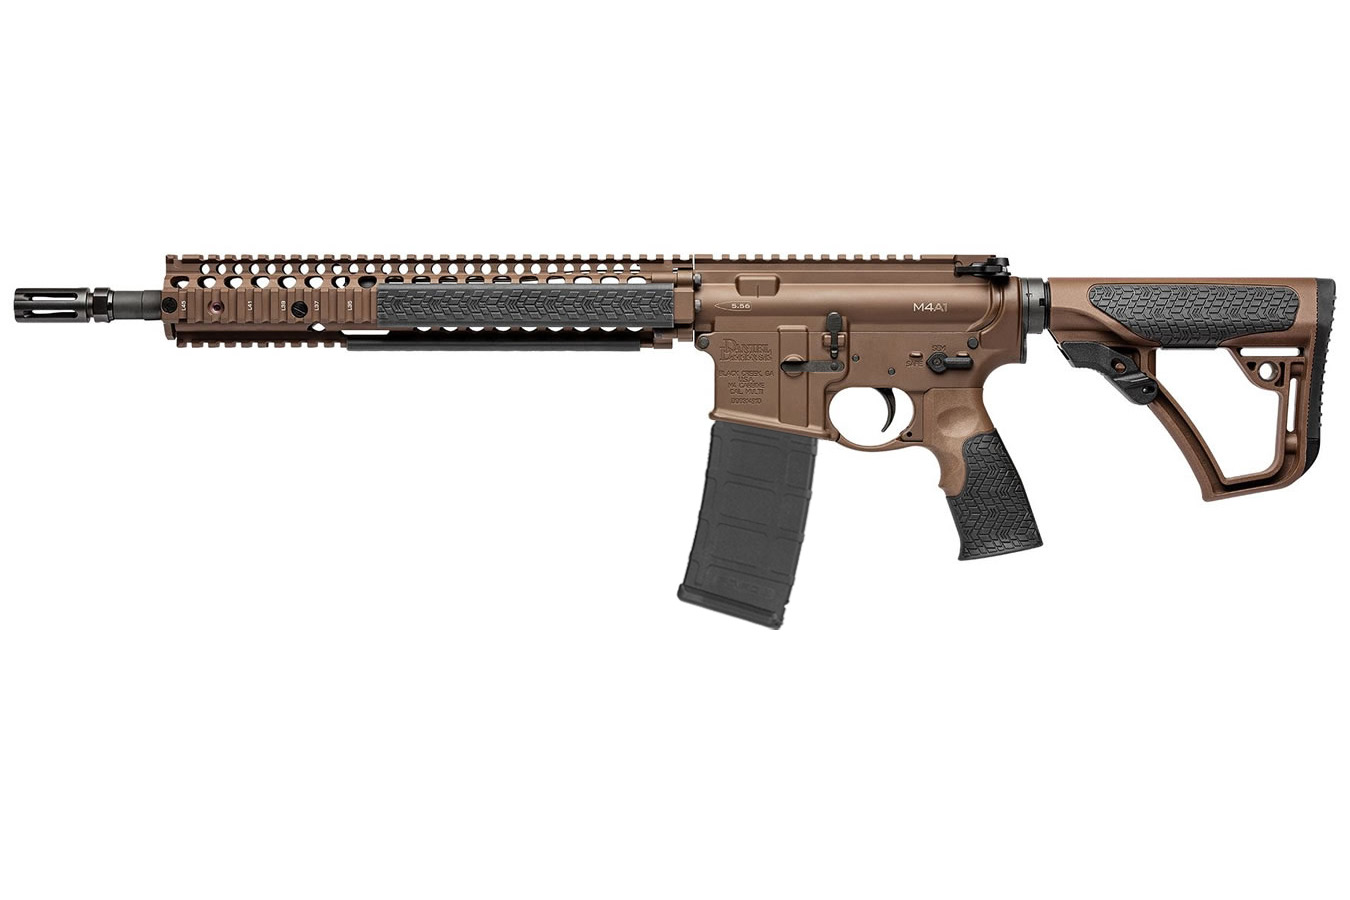 No. 13 Best Selling: DANIEL DEFENSE DDM4 M4A1 5.56 NATO 14.5 IN BBL FDE FLASHIDER PERMANENTLY ATTACHED